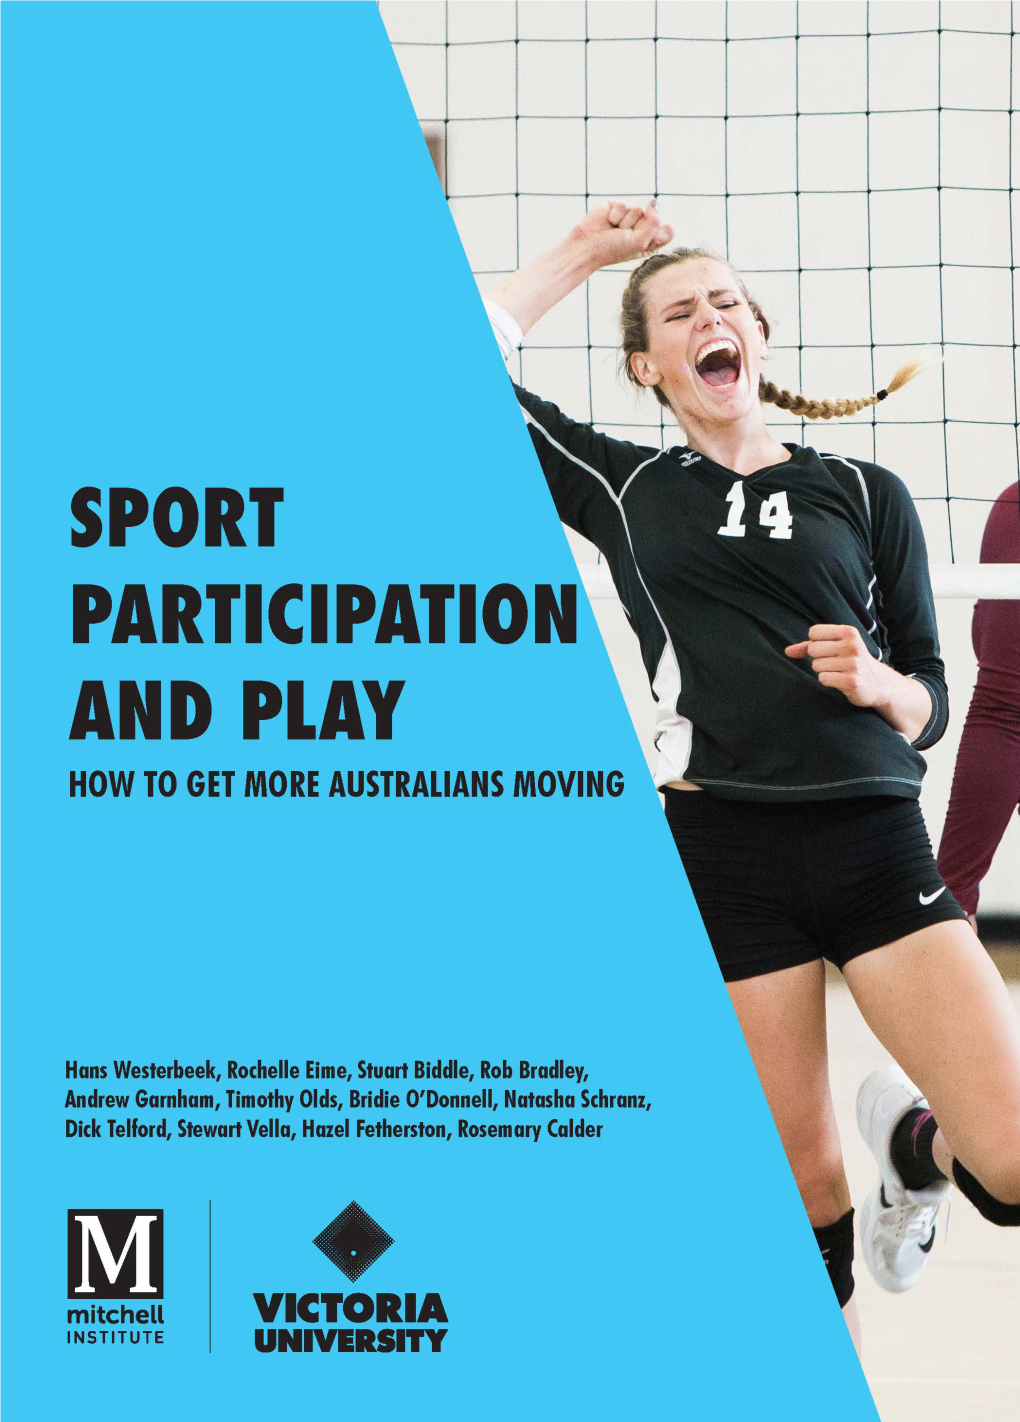 'Sport Participation and Play' Policy Paper